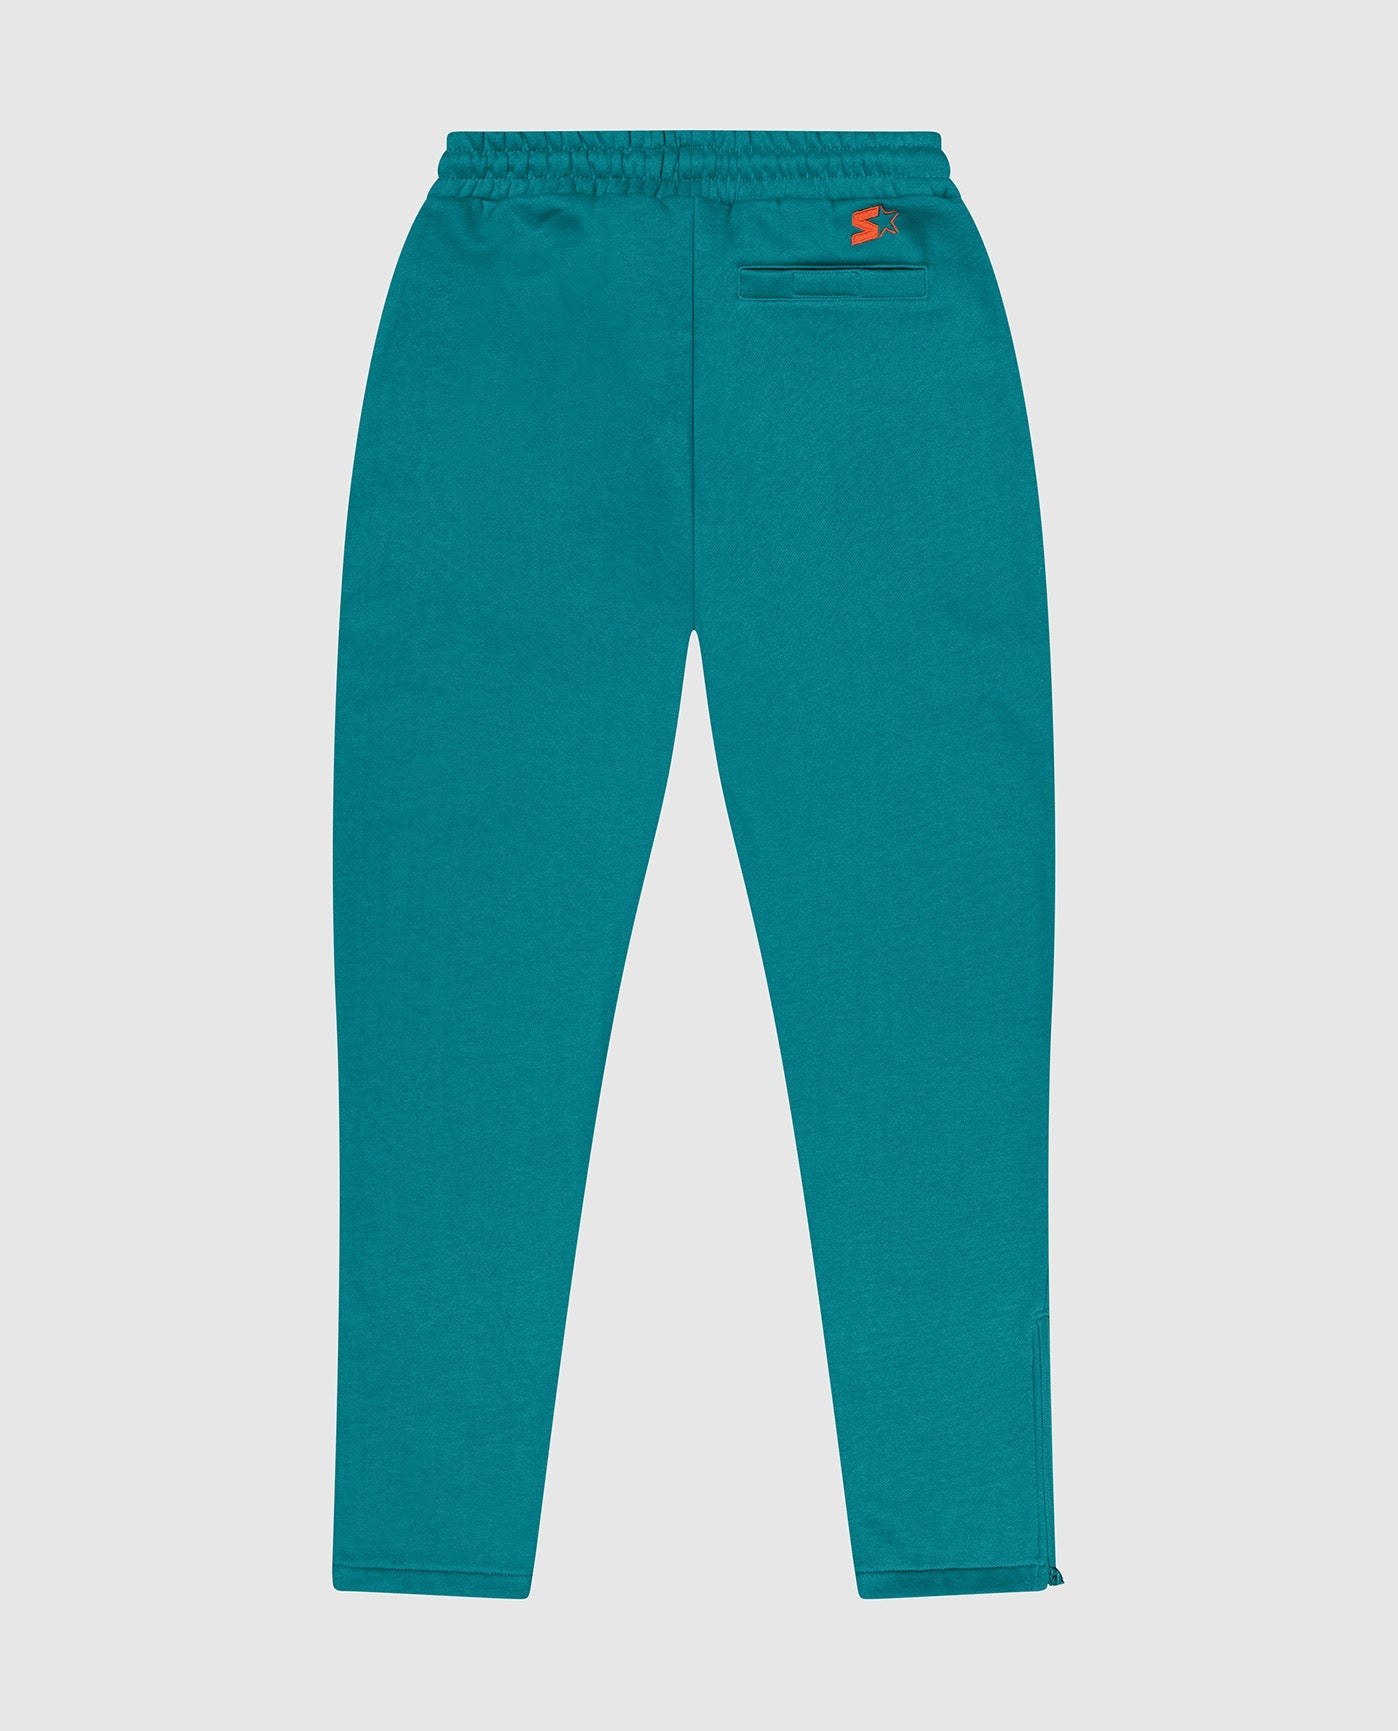 Back of Miami Dolphins Sweatpants with starter logo | Dolphins Aqua